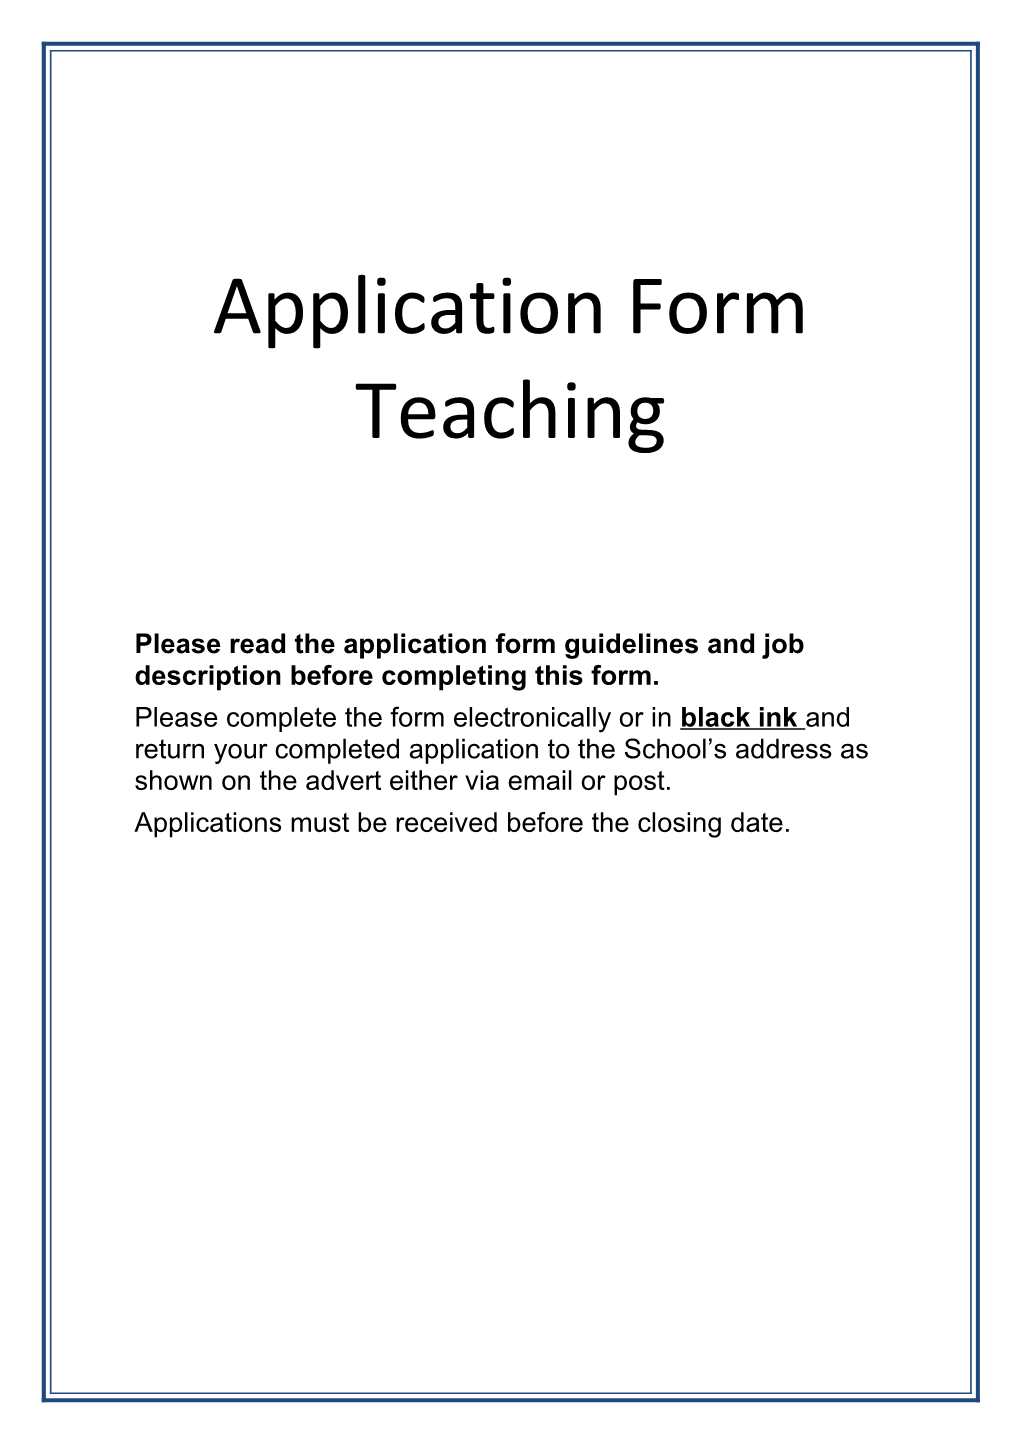 Please Read the Application Form Guidelines and Job Description Before Completing This Form